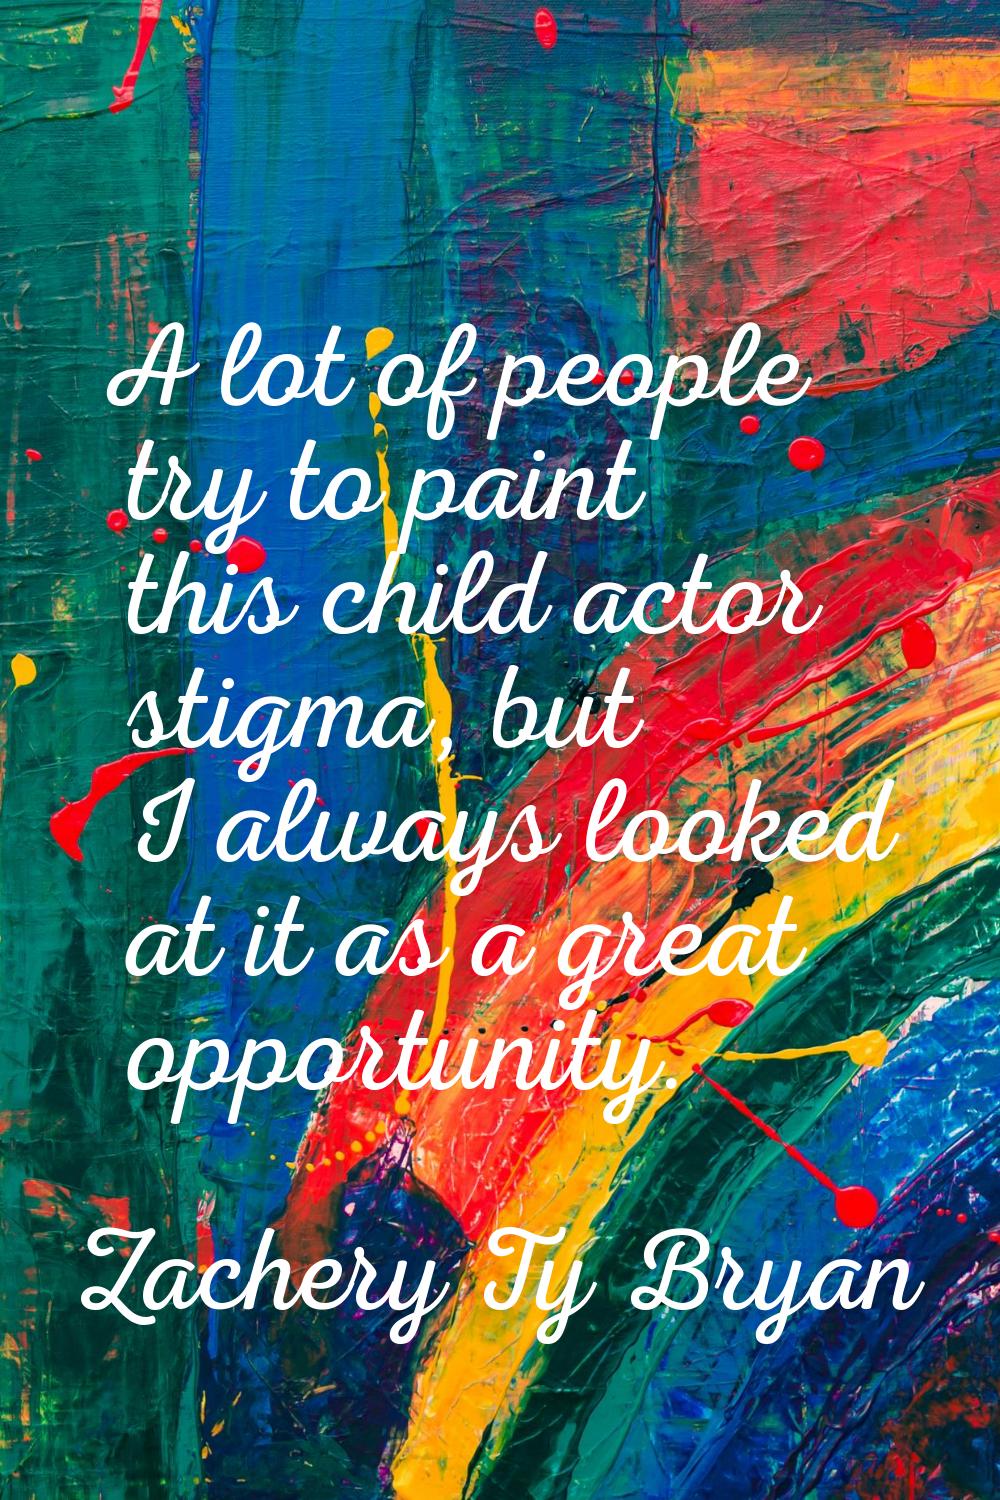 A lot of people try to paint this child actor stigma, but I always looked at it as a great opportun